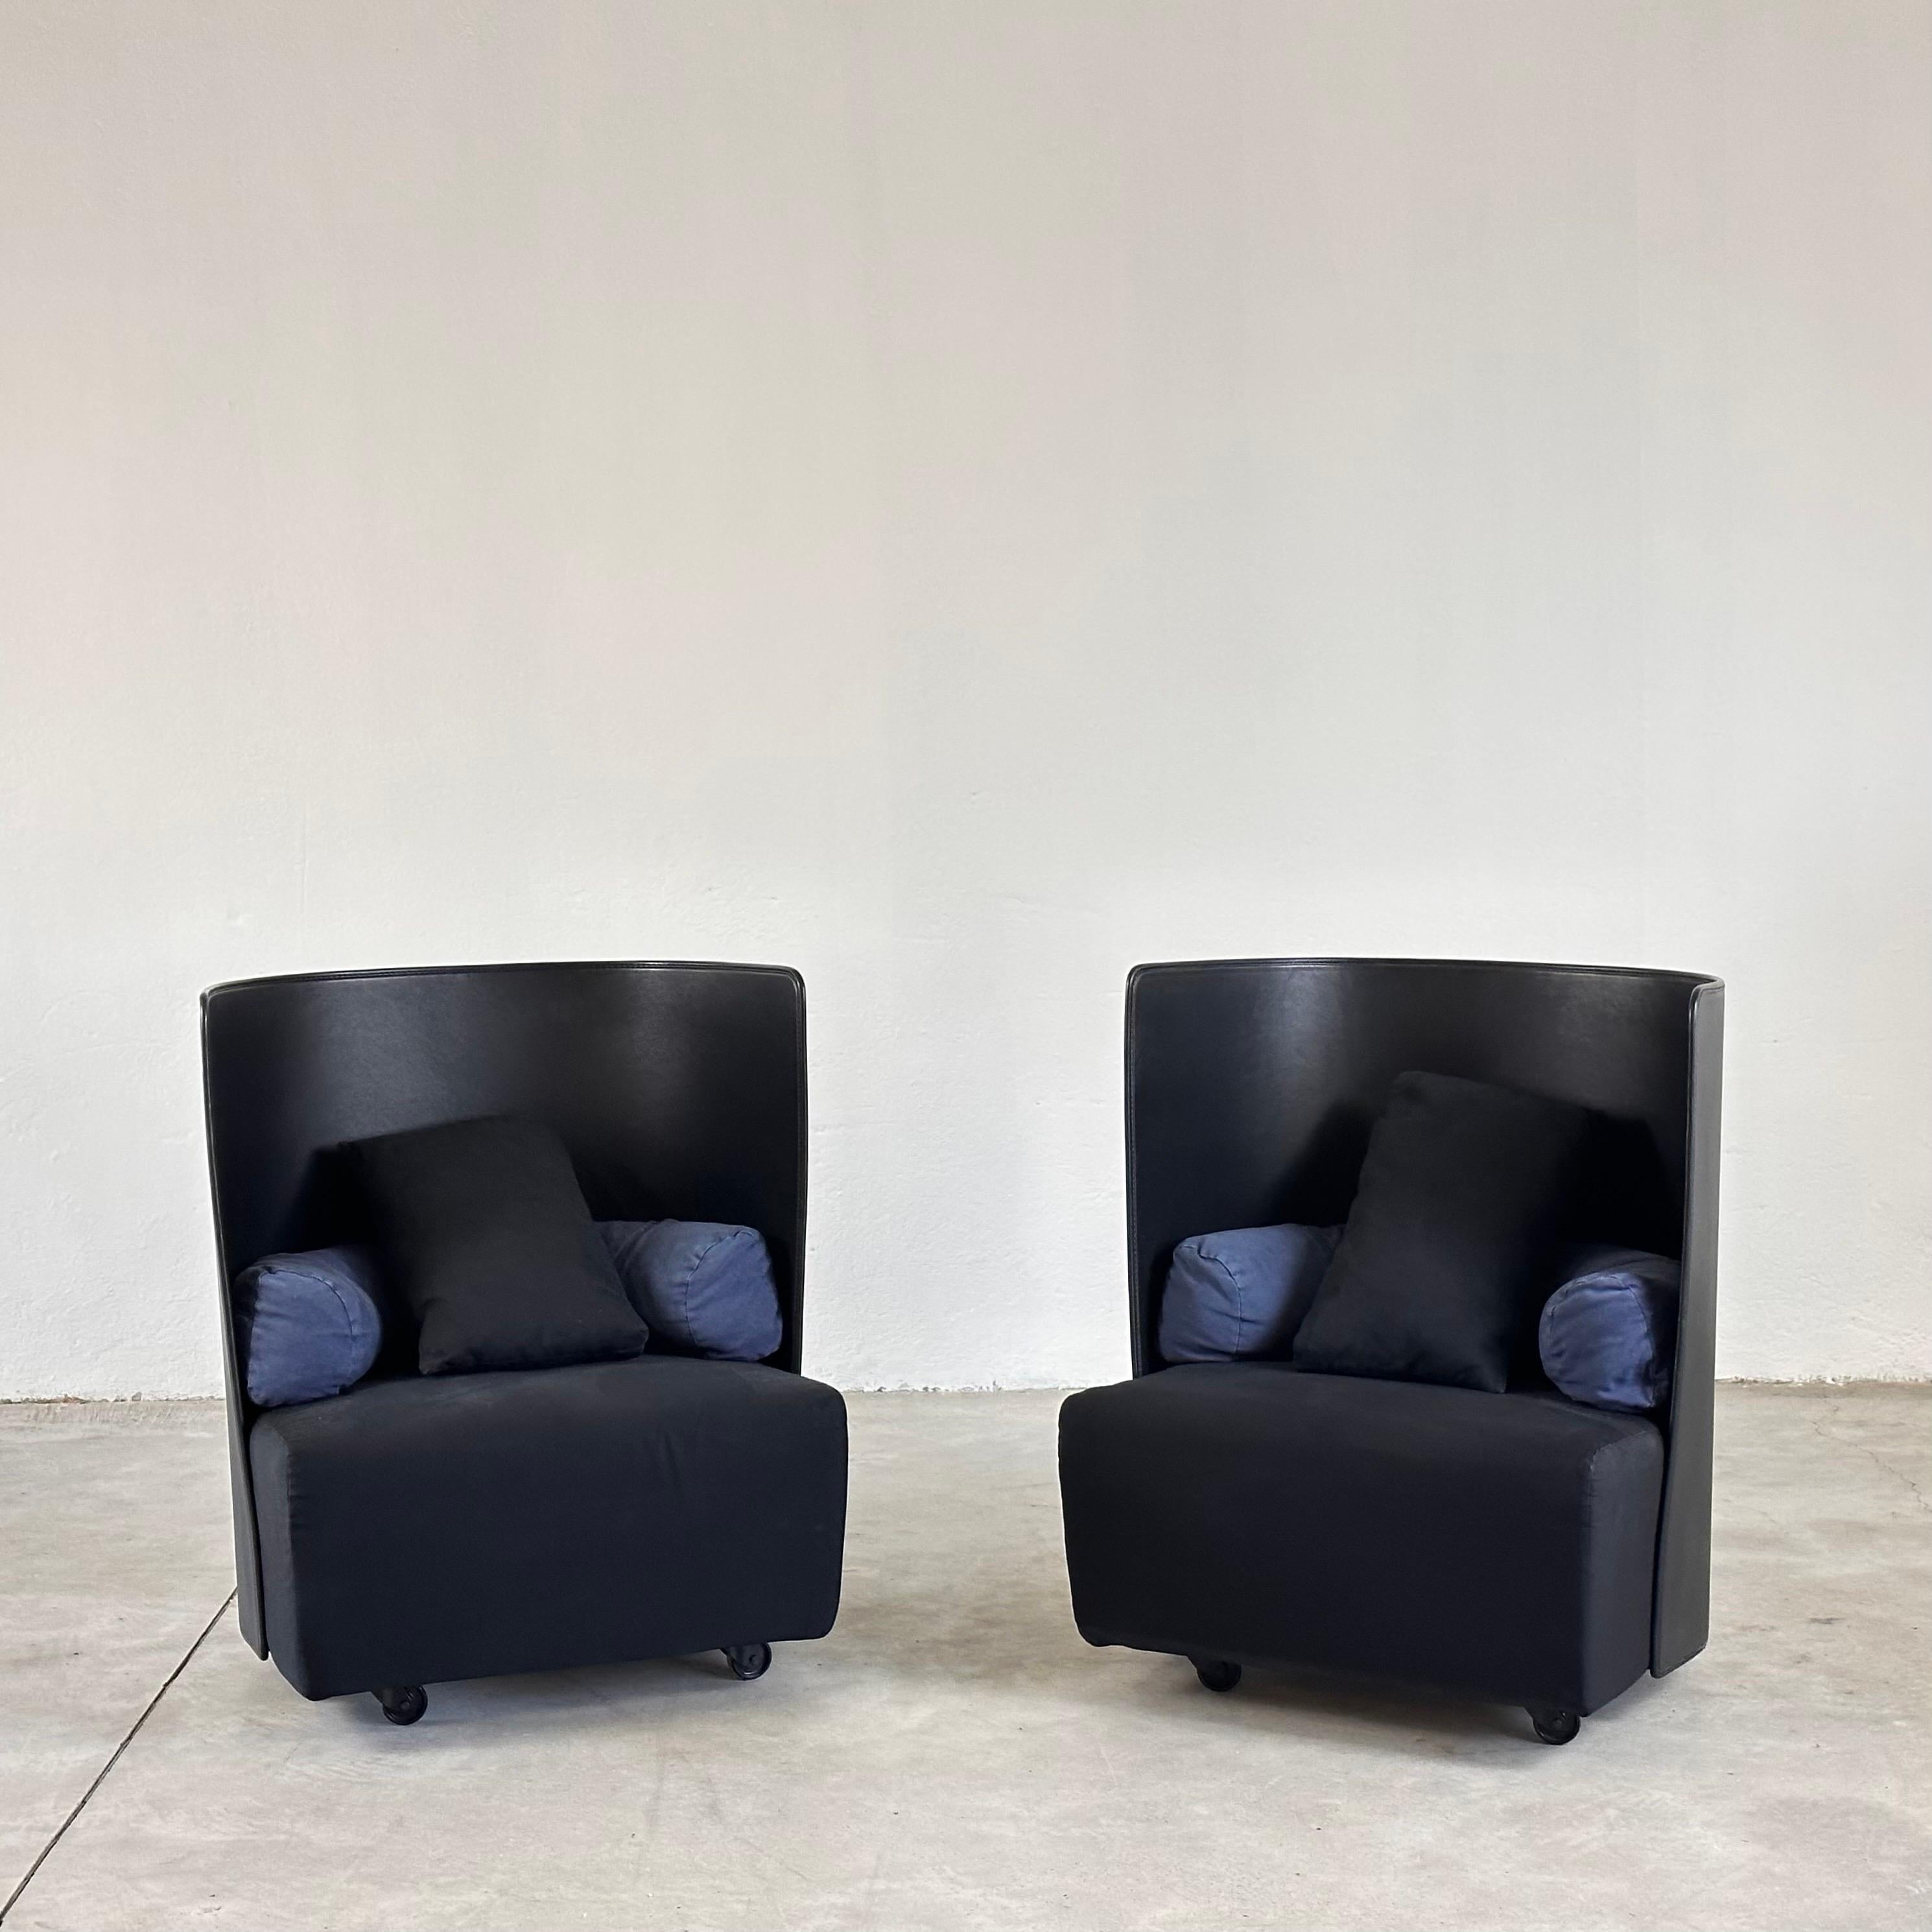 Pair of 'Campo' Armchairs by De Pas, Urbino, Lomazzi for Zanotta, 1980s

Unveiling a splendid testament to vintage sophistication, this set of two 'Campo' armchairs stands as an exceptional creation by renowned designers De Pas, Urbino, and Lomazzi